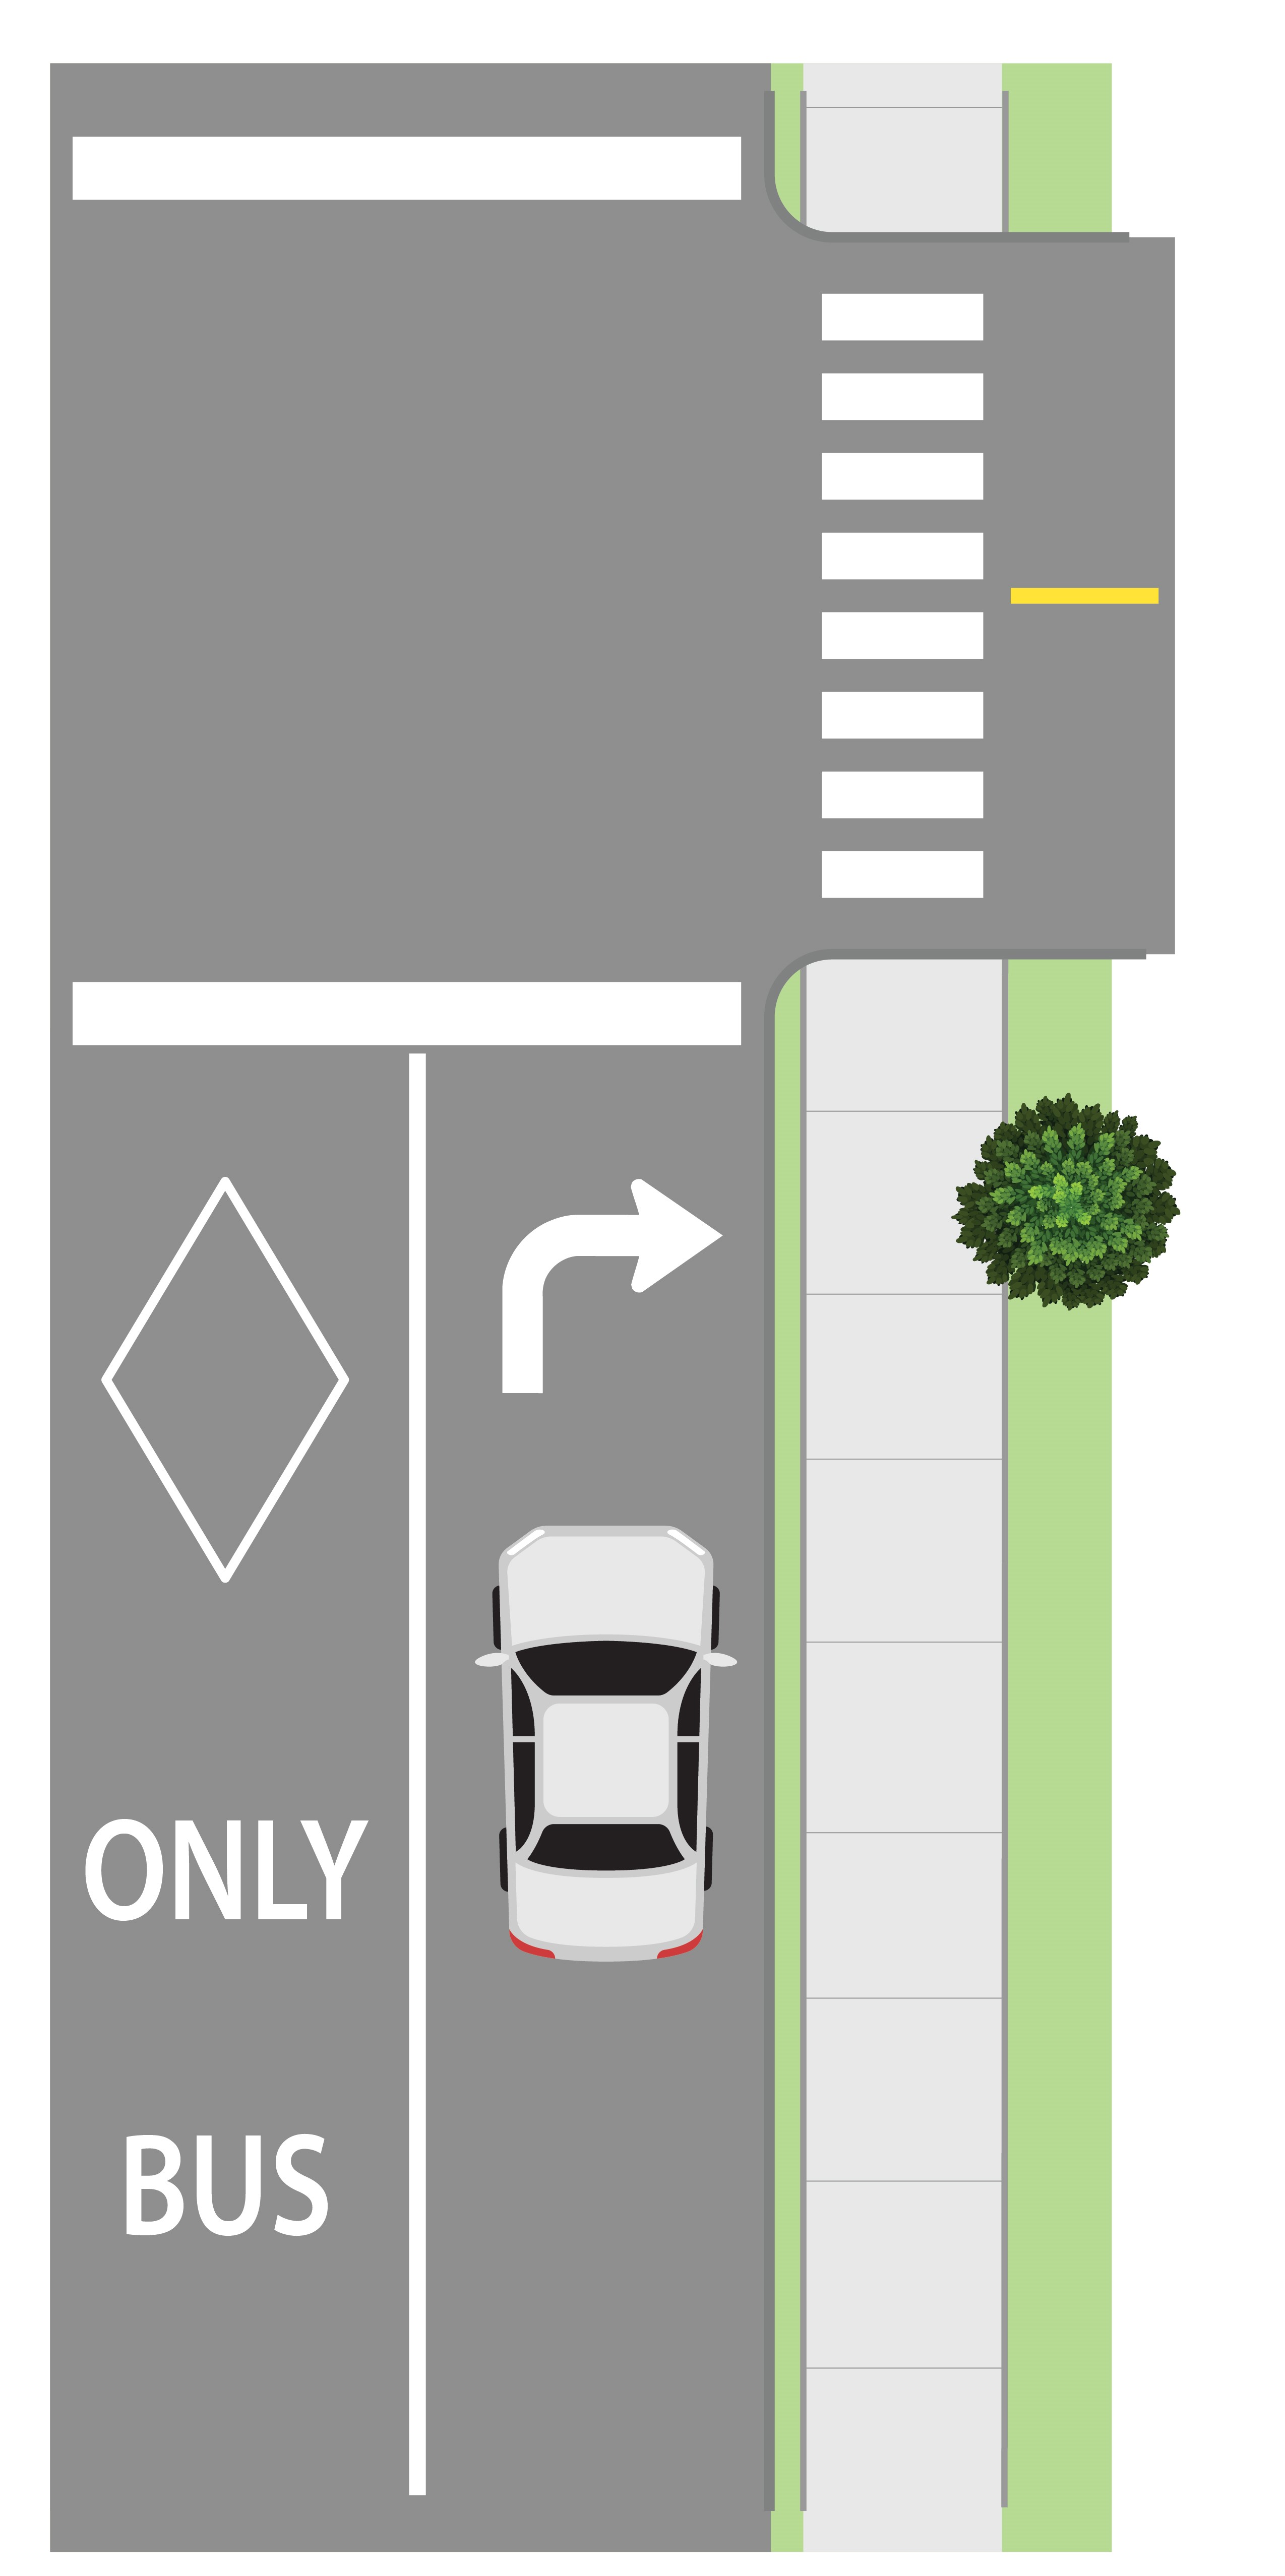 This graphic shows a through-lane for buses and dedicated right turn lane for vehicles.